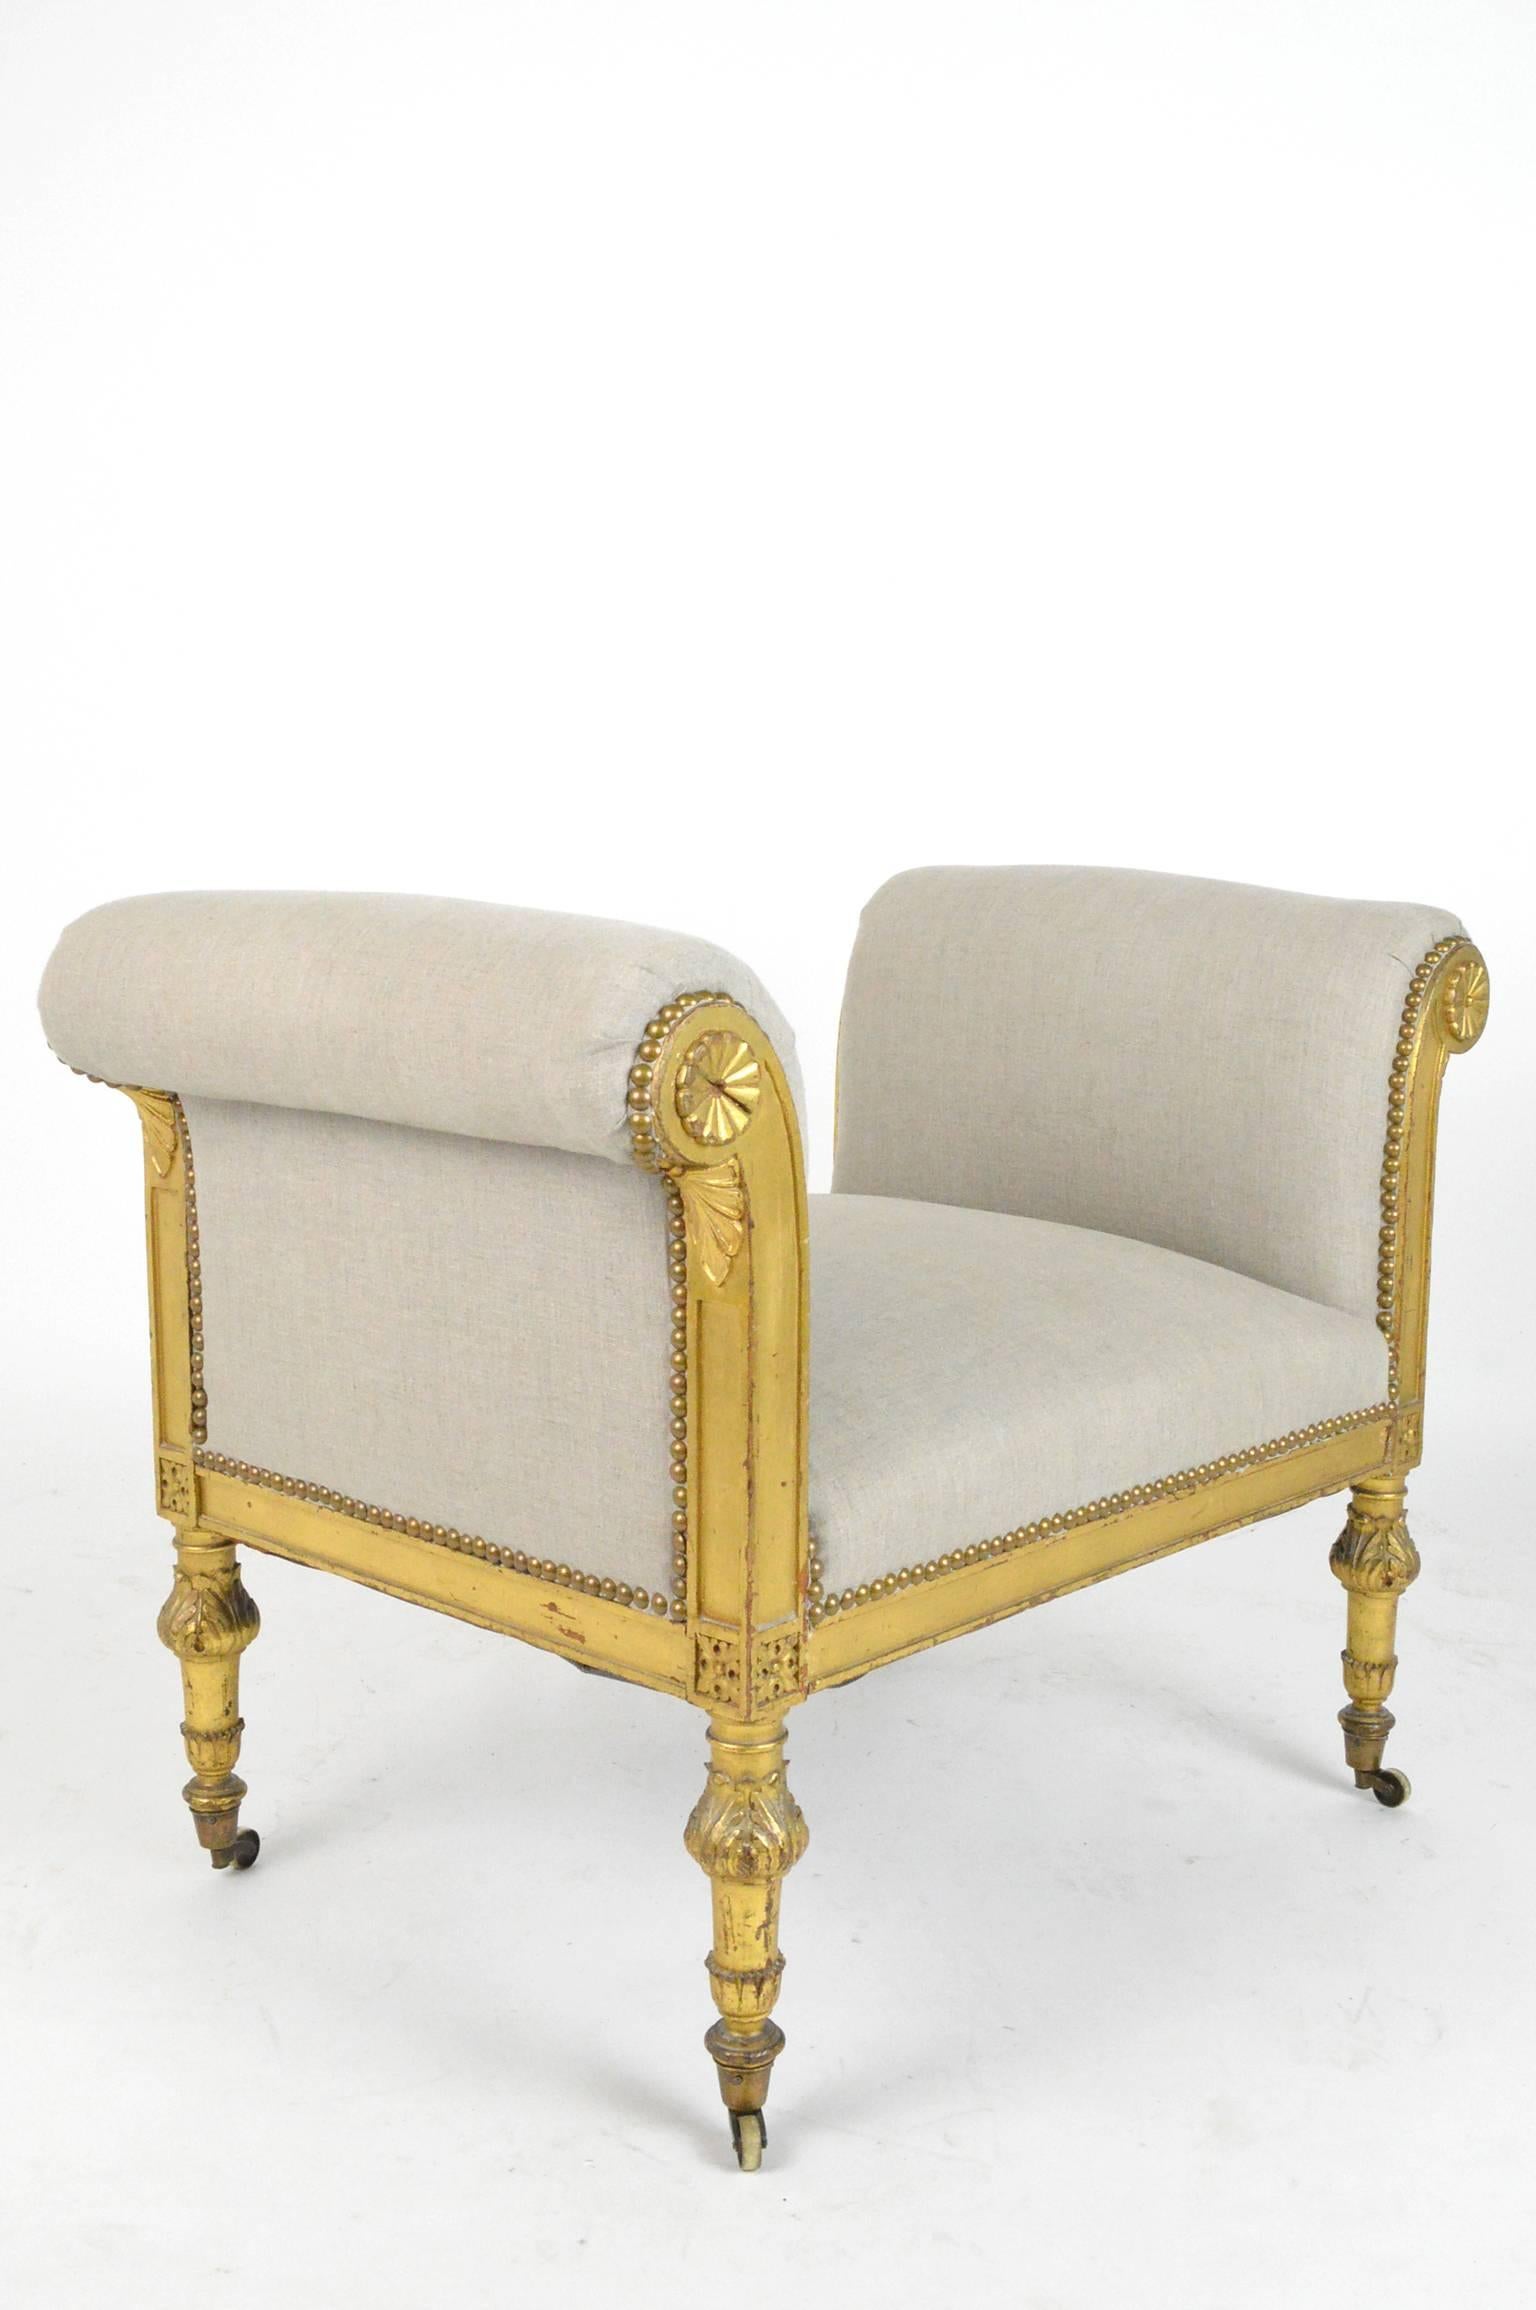 French giltwood bench or window seat, raised on four fluted column legs ending on brass casters and reupholstered in a linen fabric.